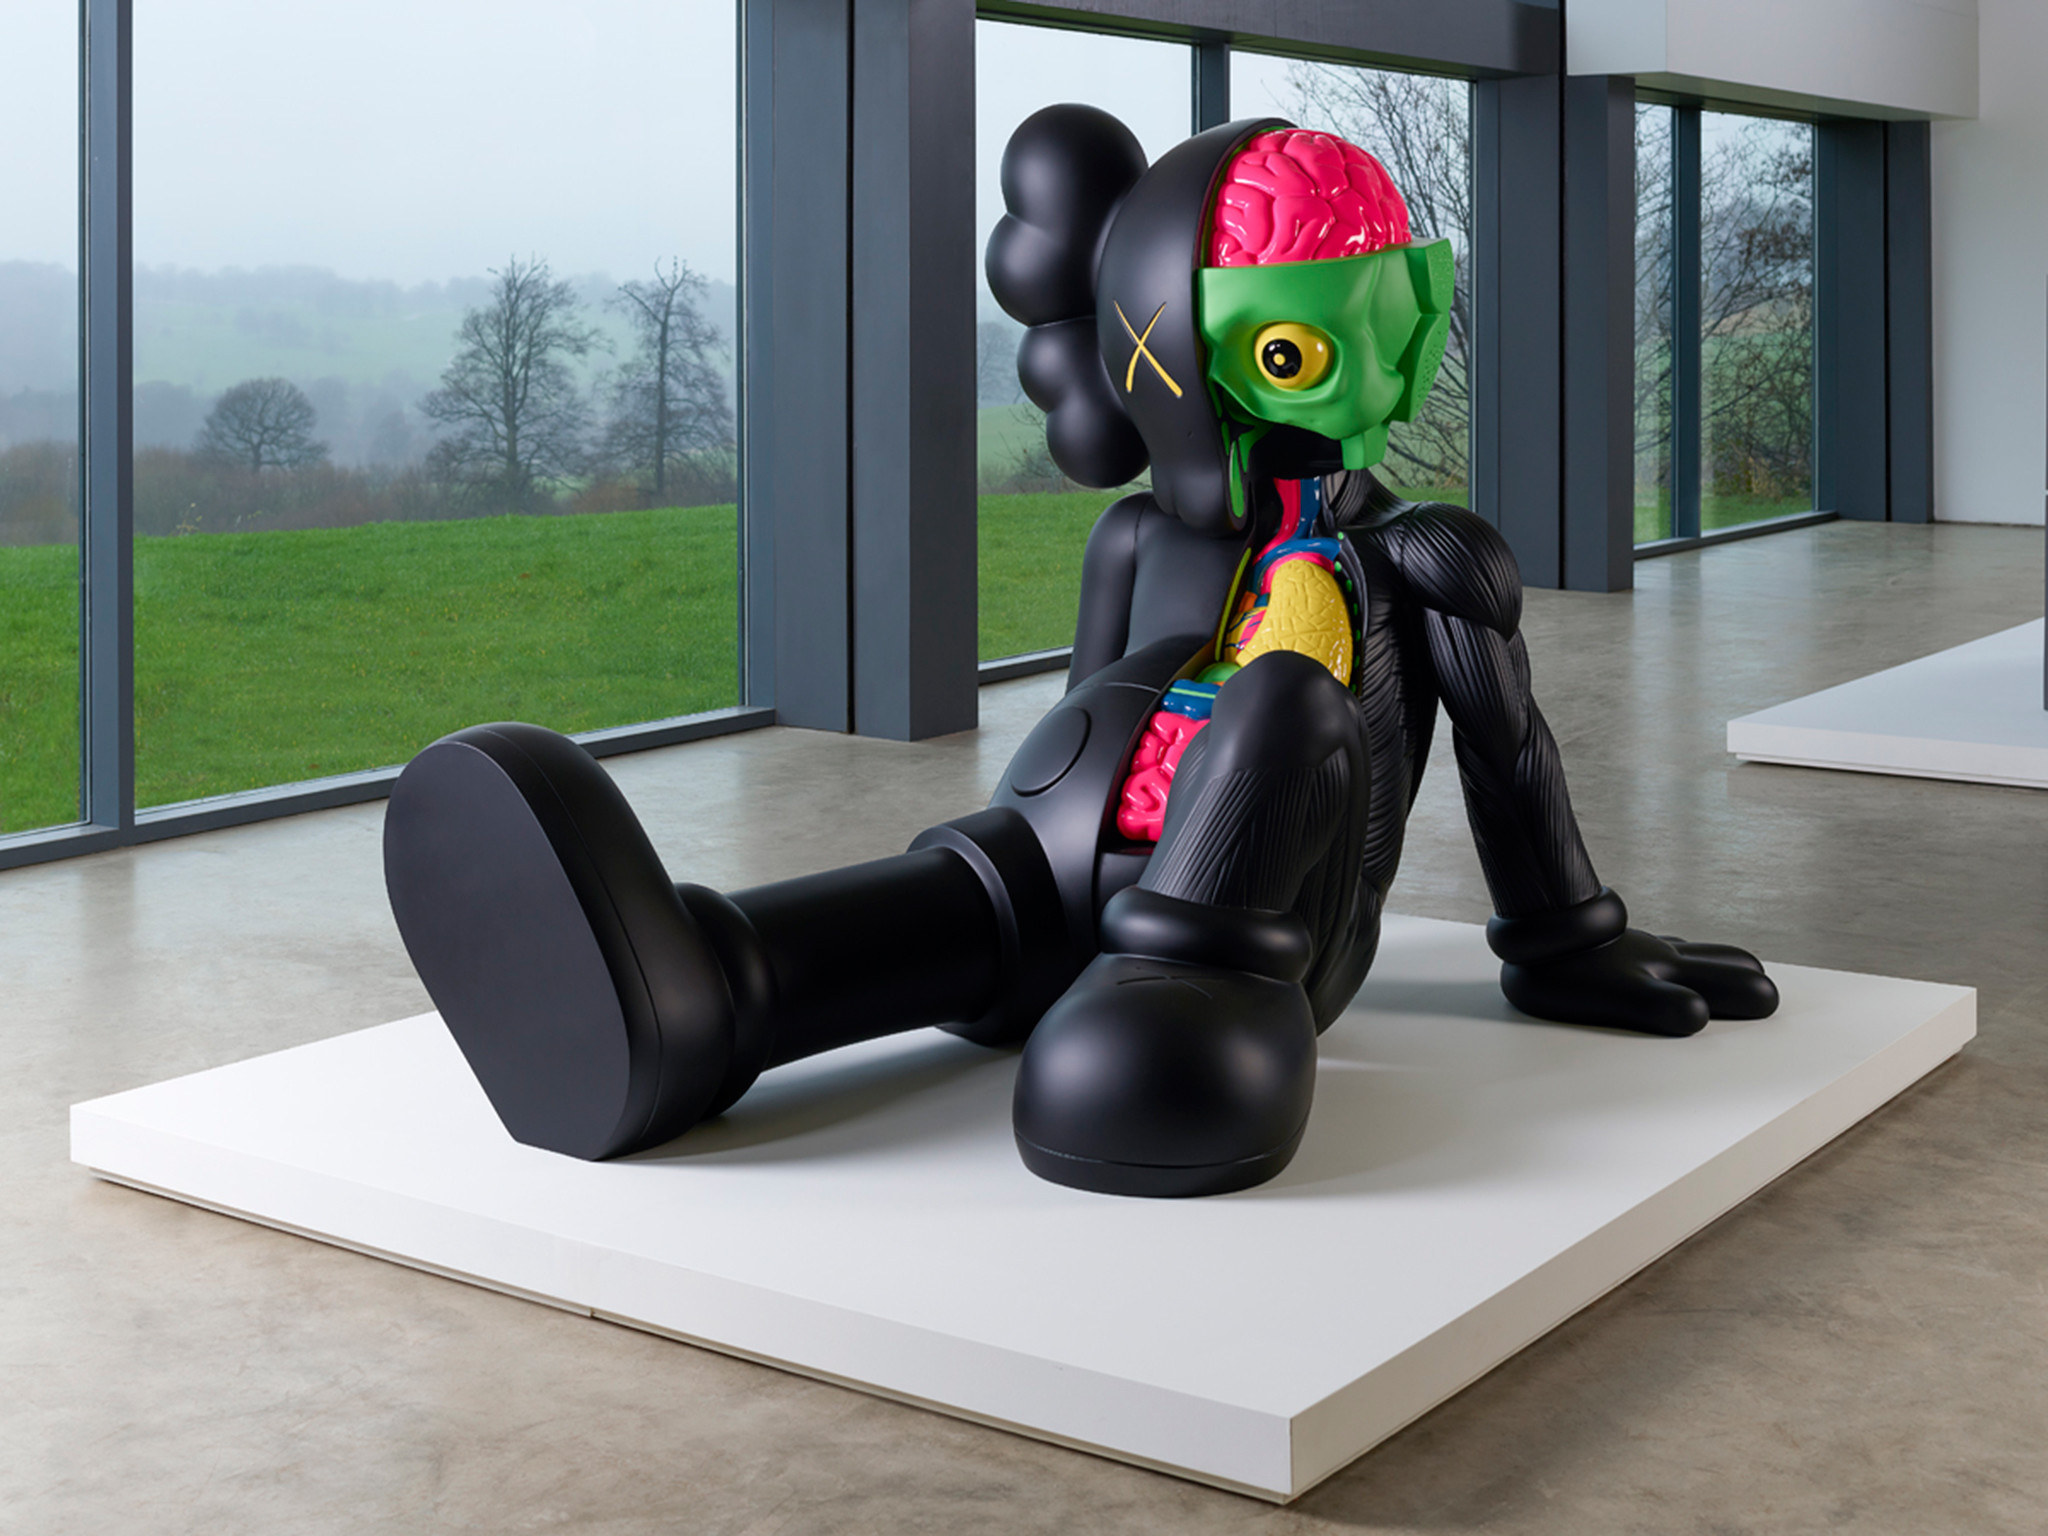 KAWS, Yorkshire Sculpture Park, Wakefield, review Hipsters hero feels likeable but bland The Independent